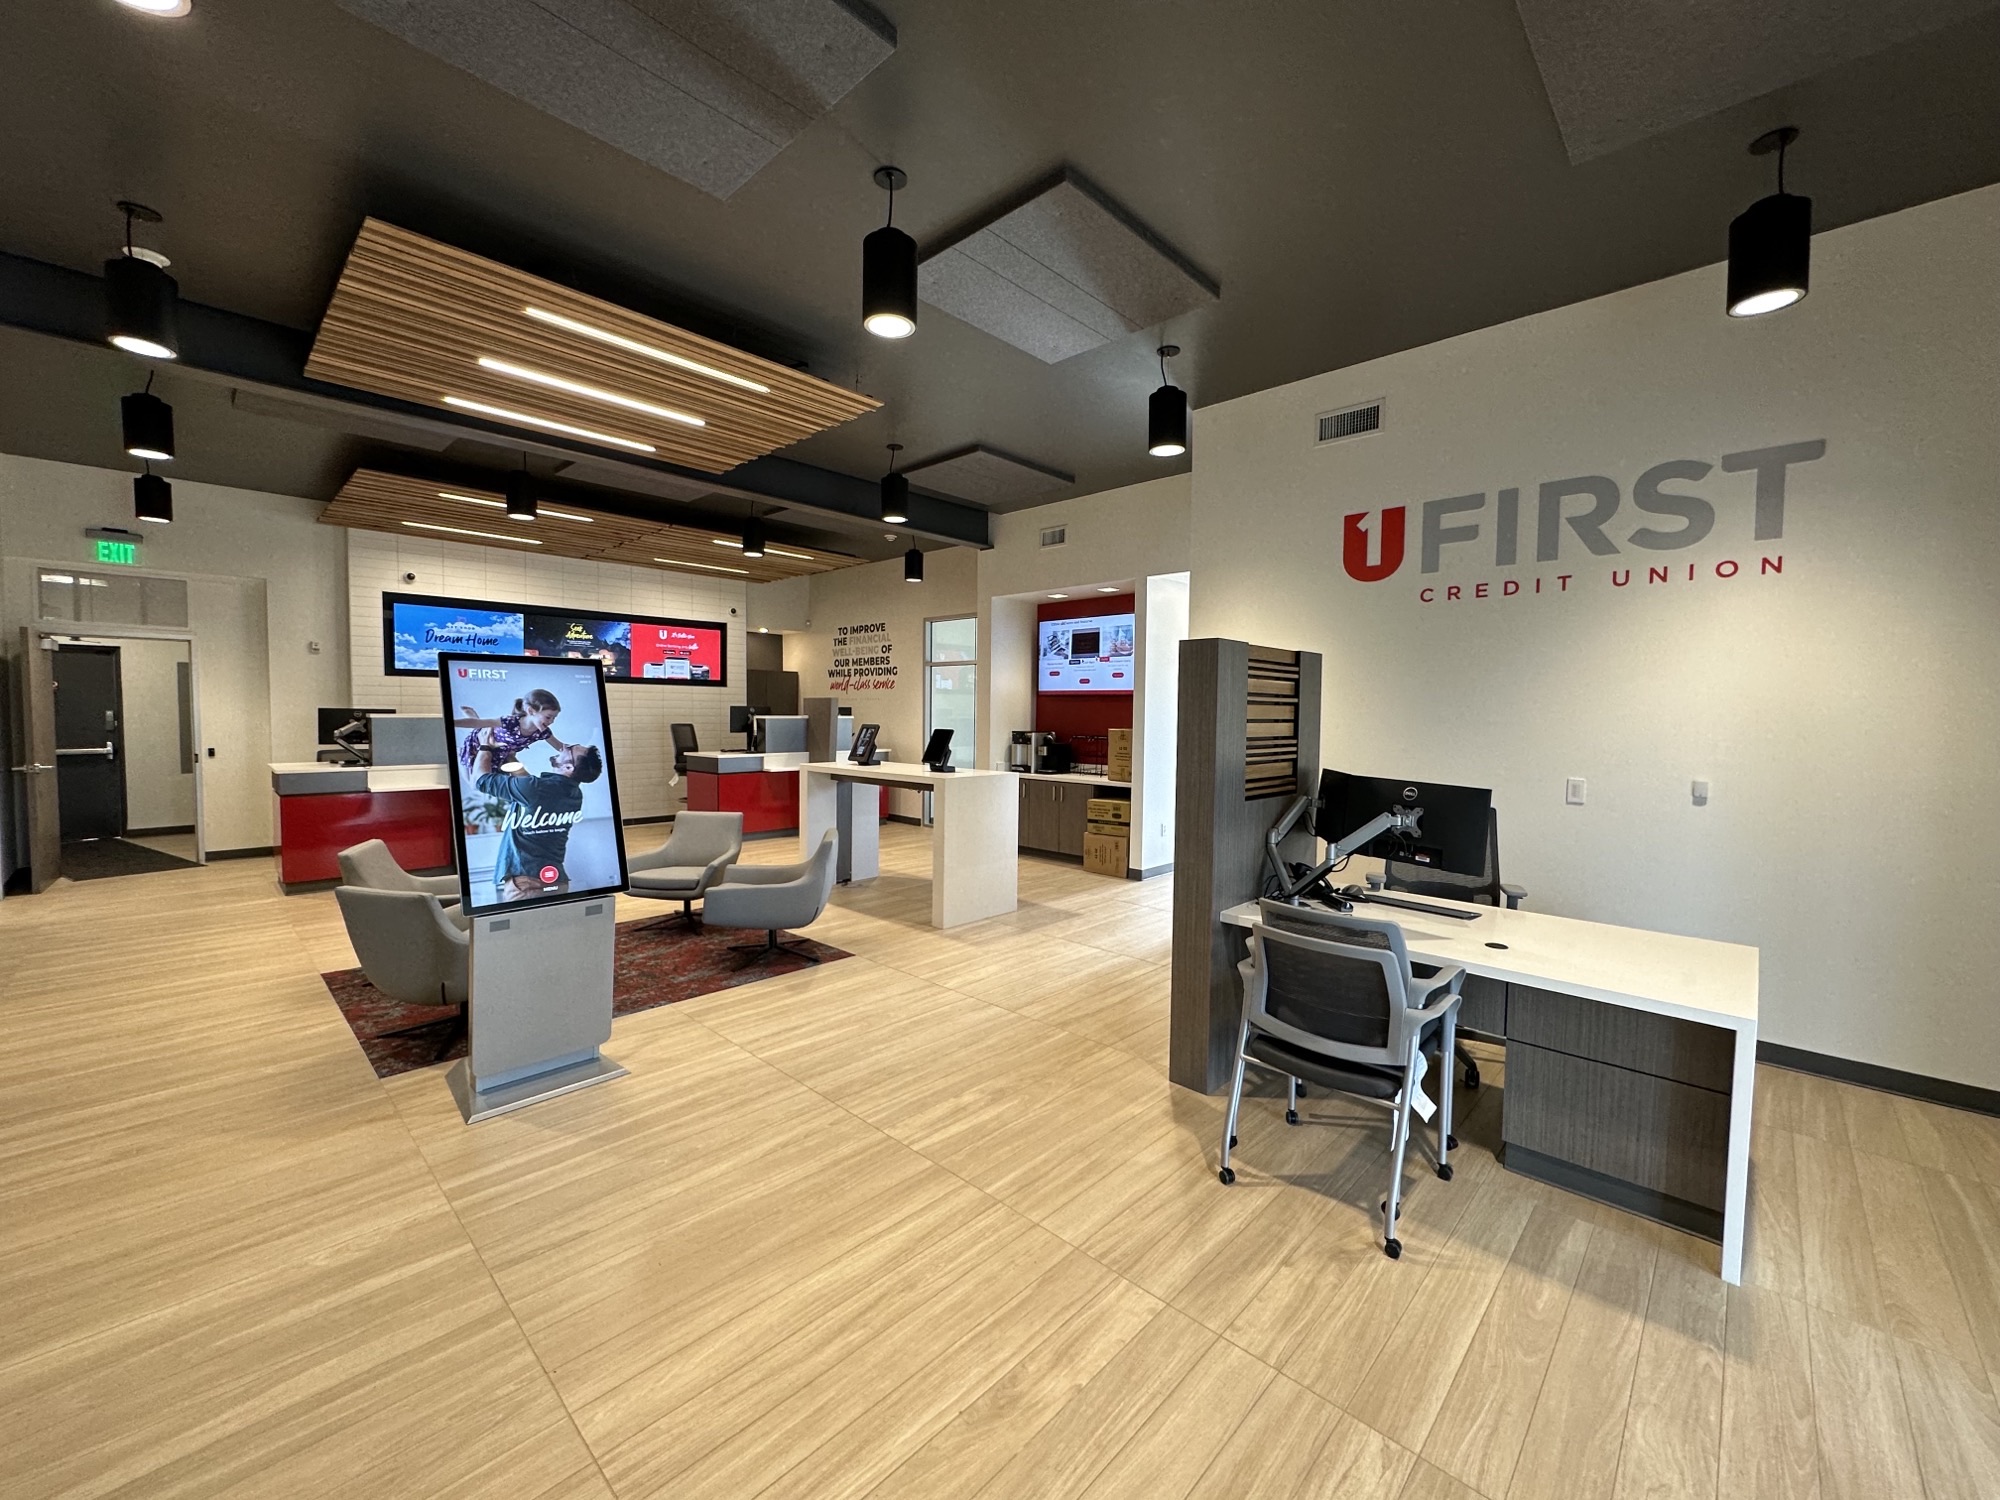 a member opens a bank account at UFirst